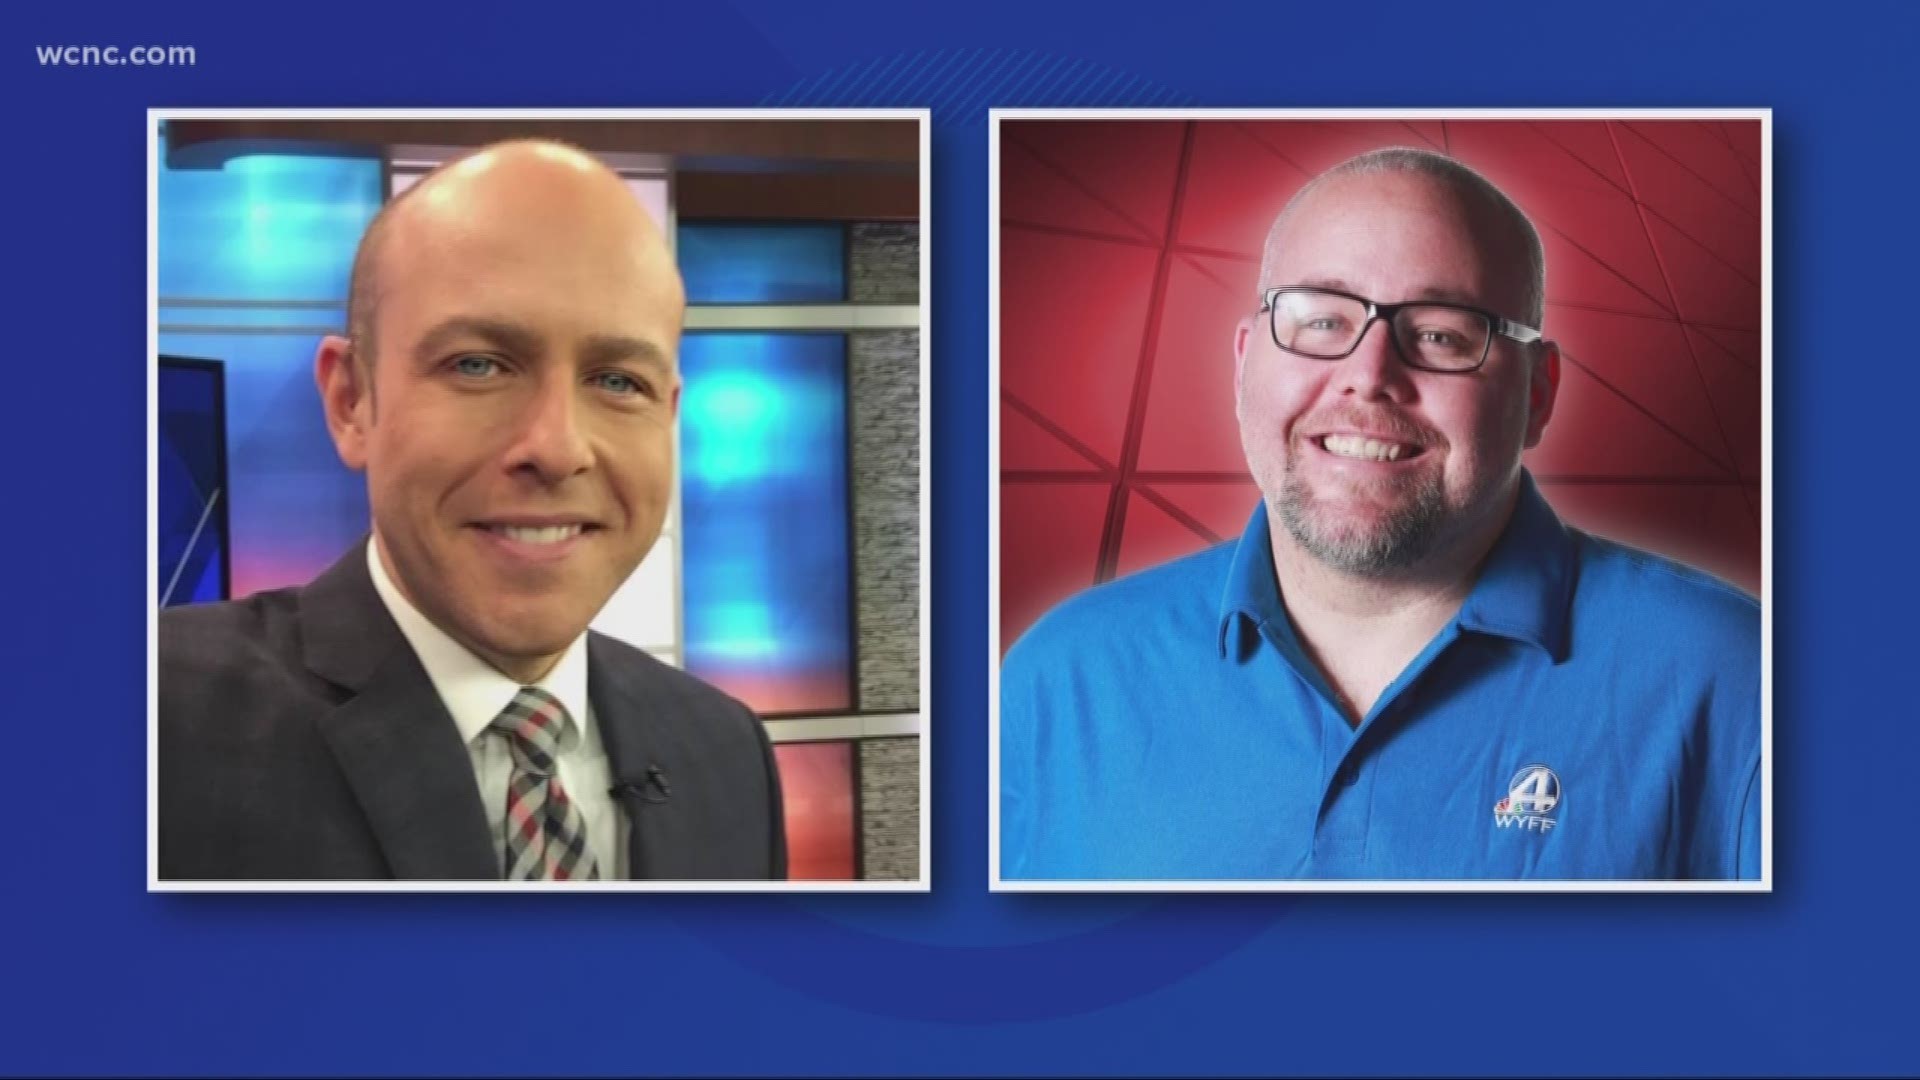 According to the station's website, news anchor Mike McCormick and photojournalist Aaron Smeltzer were killed after a tree fell on their SUV.